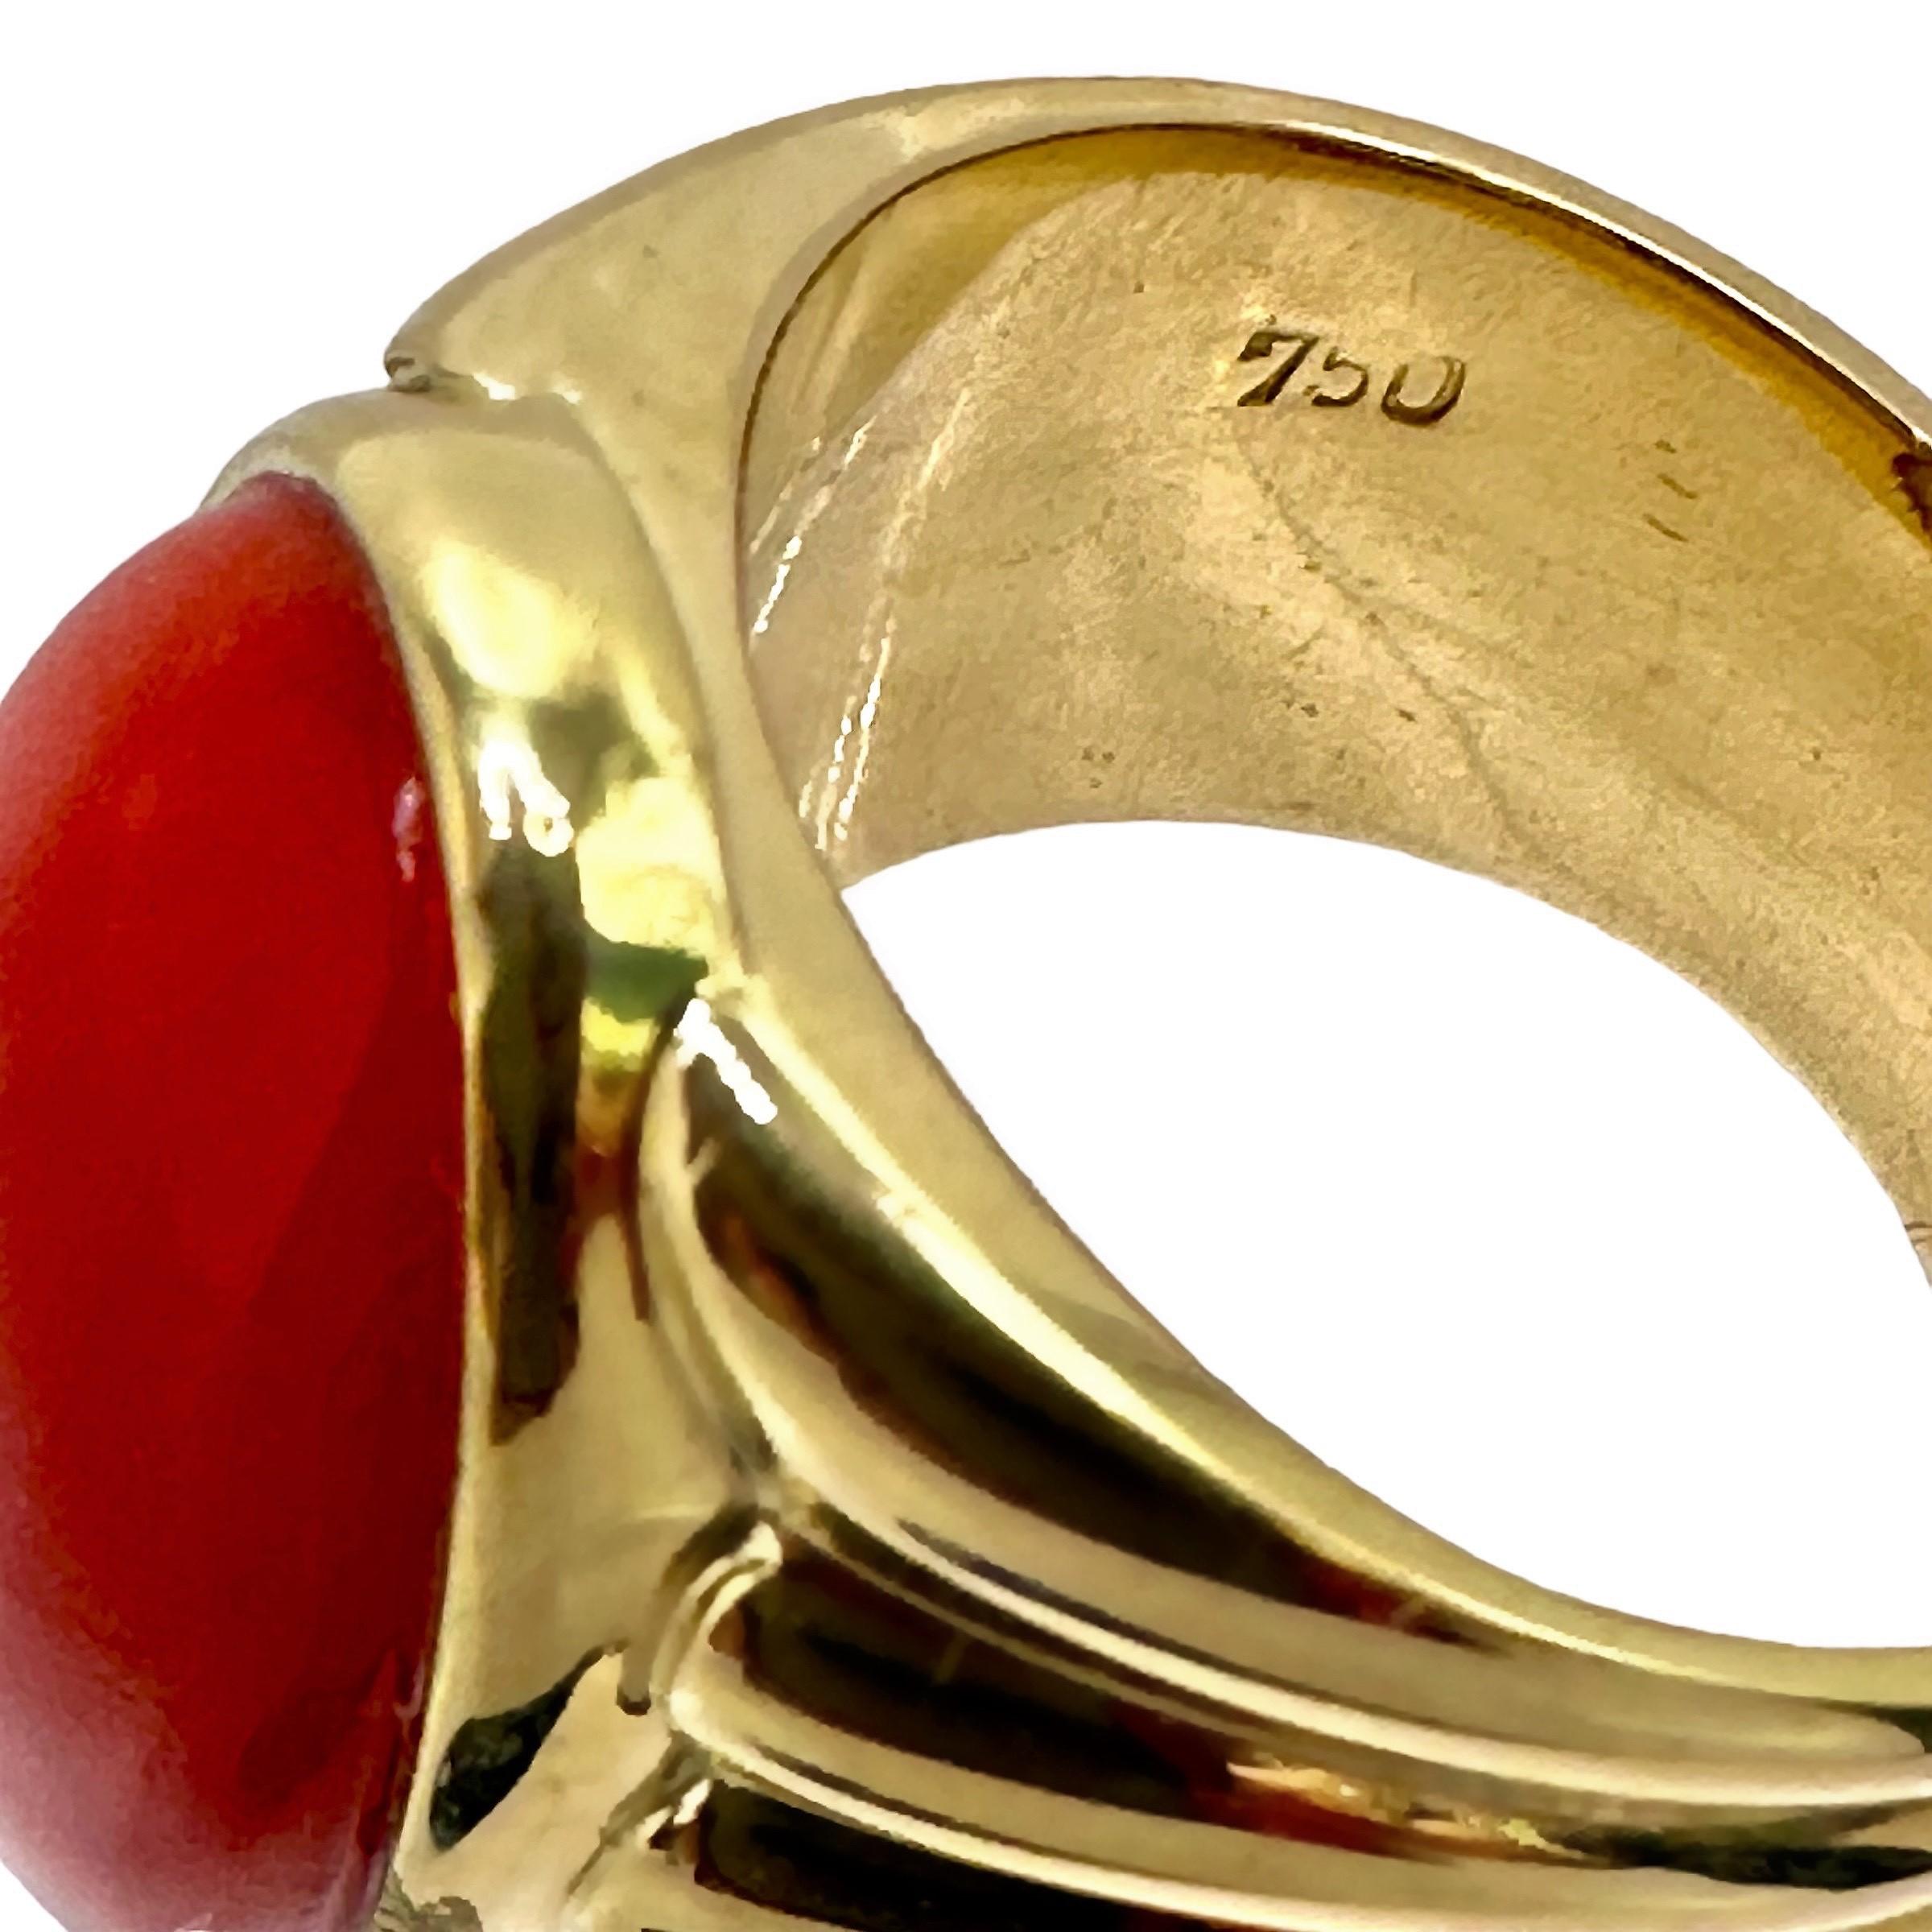 Wide Fluted Gold Ring with Large Deep Red Oxblood Cabochon For Sale 2